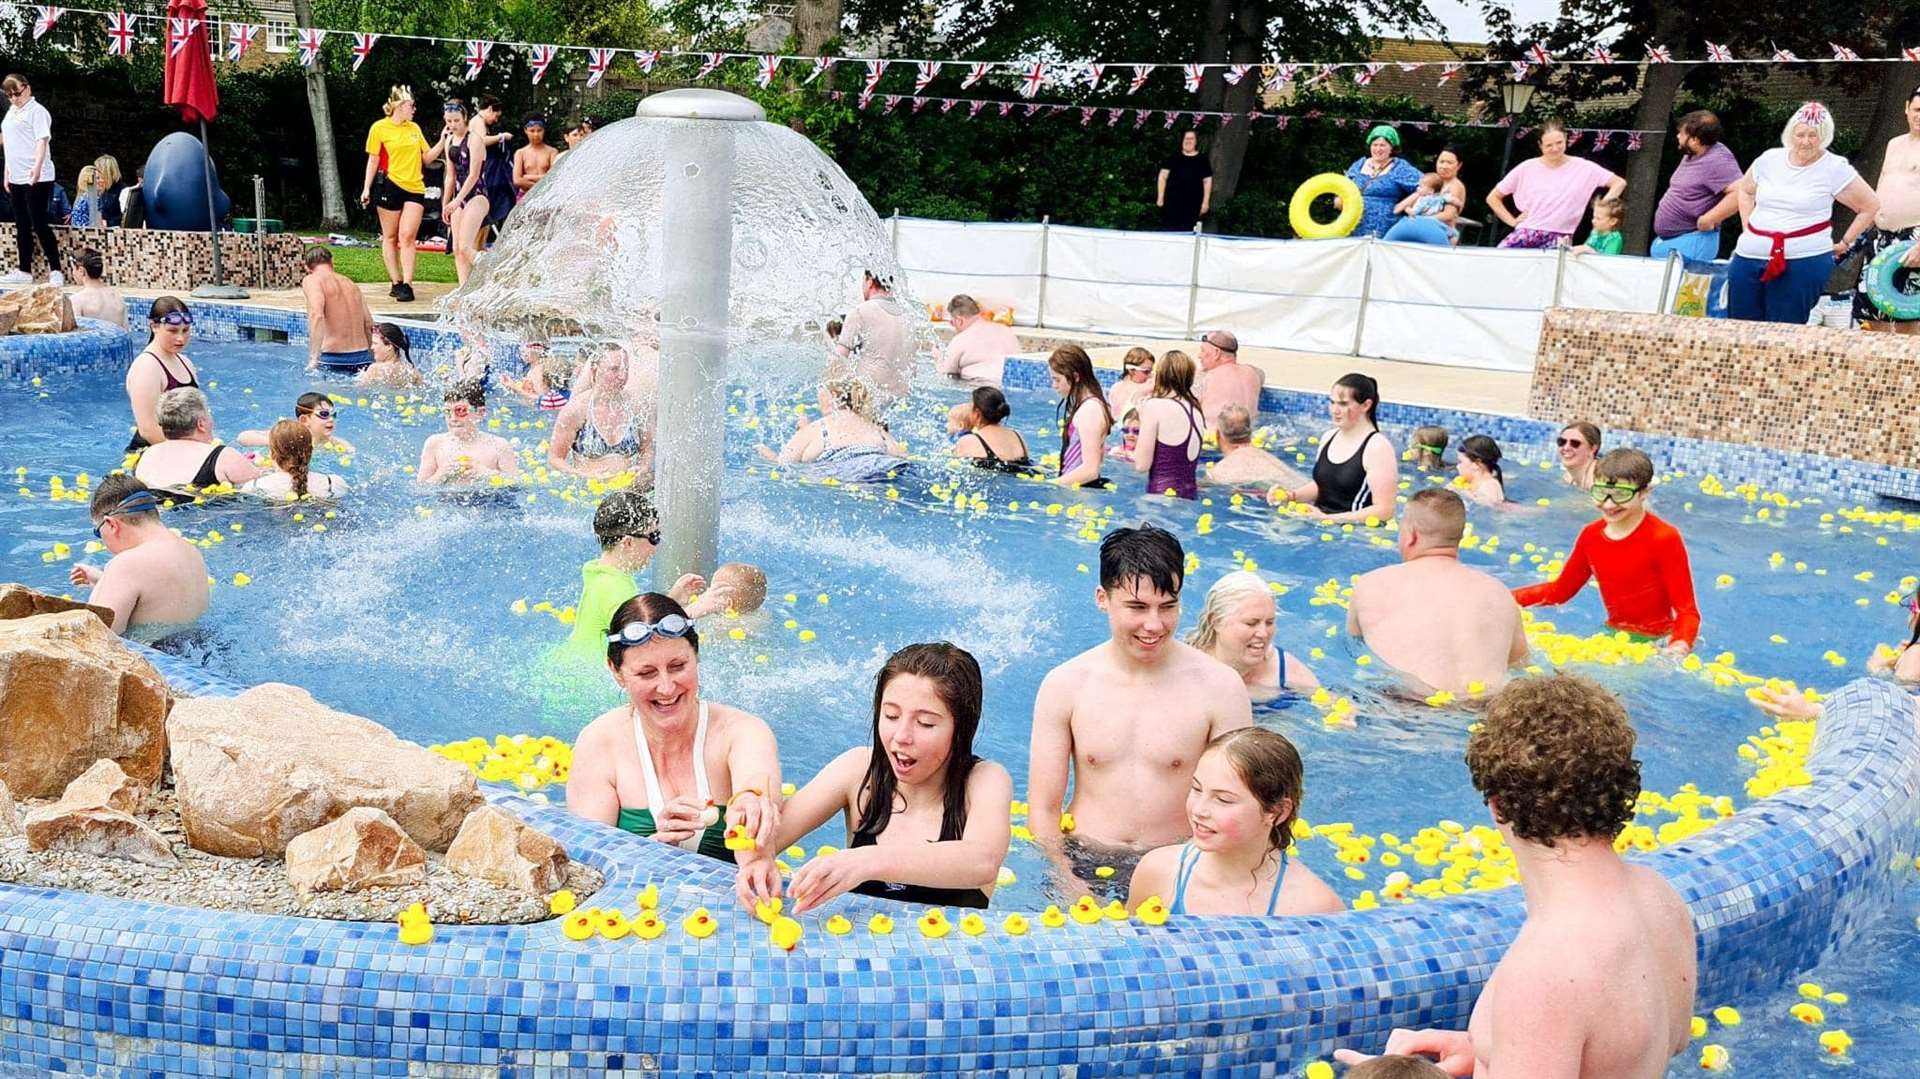 Faversham Pools is the town's most popular attraction, but may be forced to raise prices if council plans go ahead. Photo: Faversham Pools